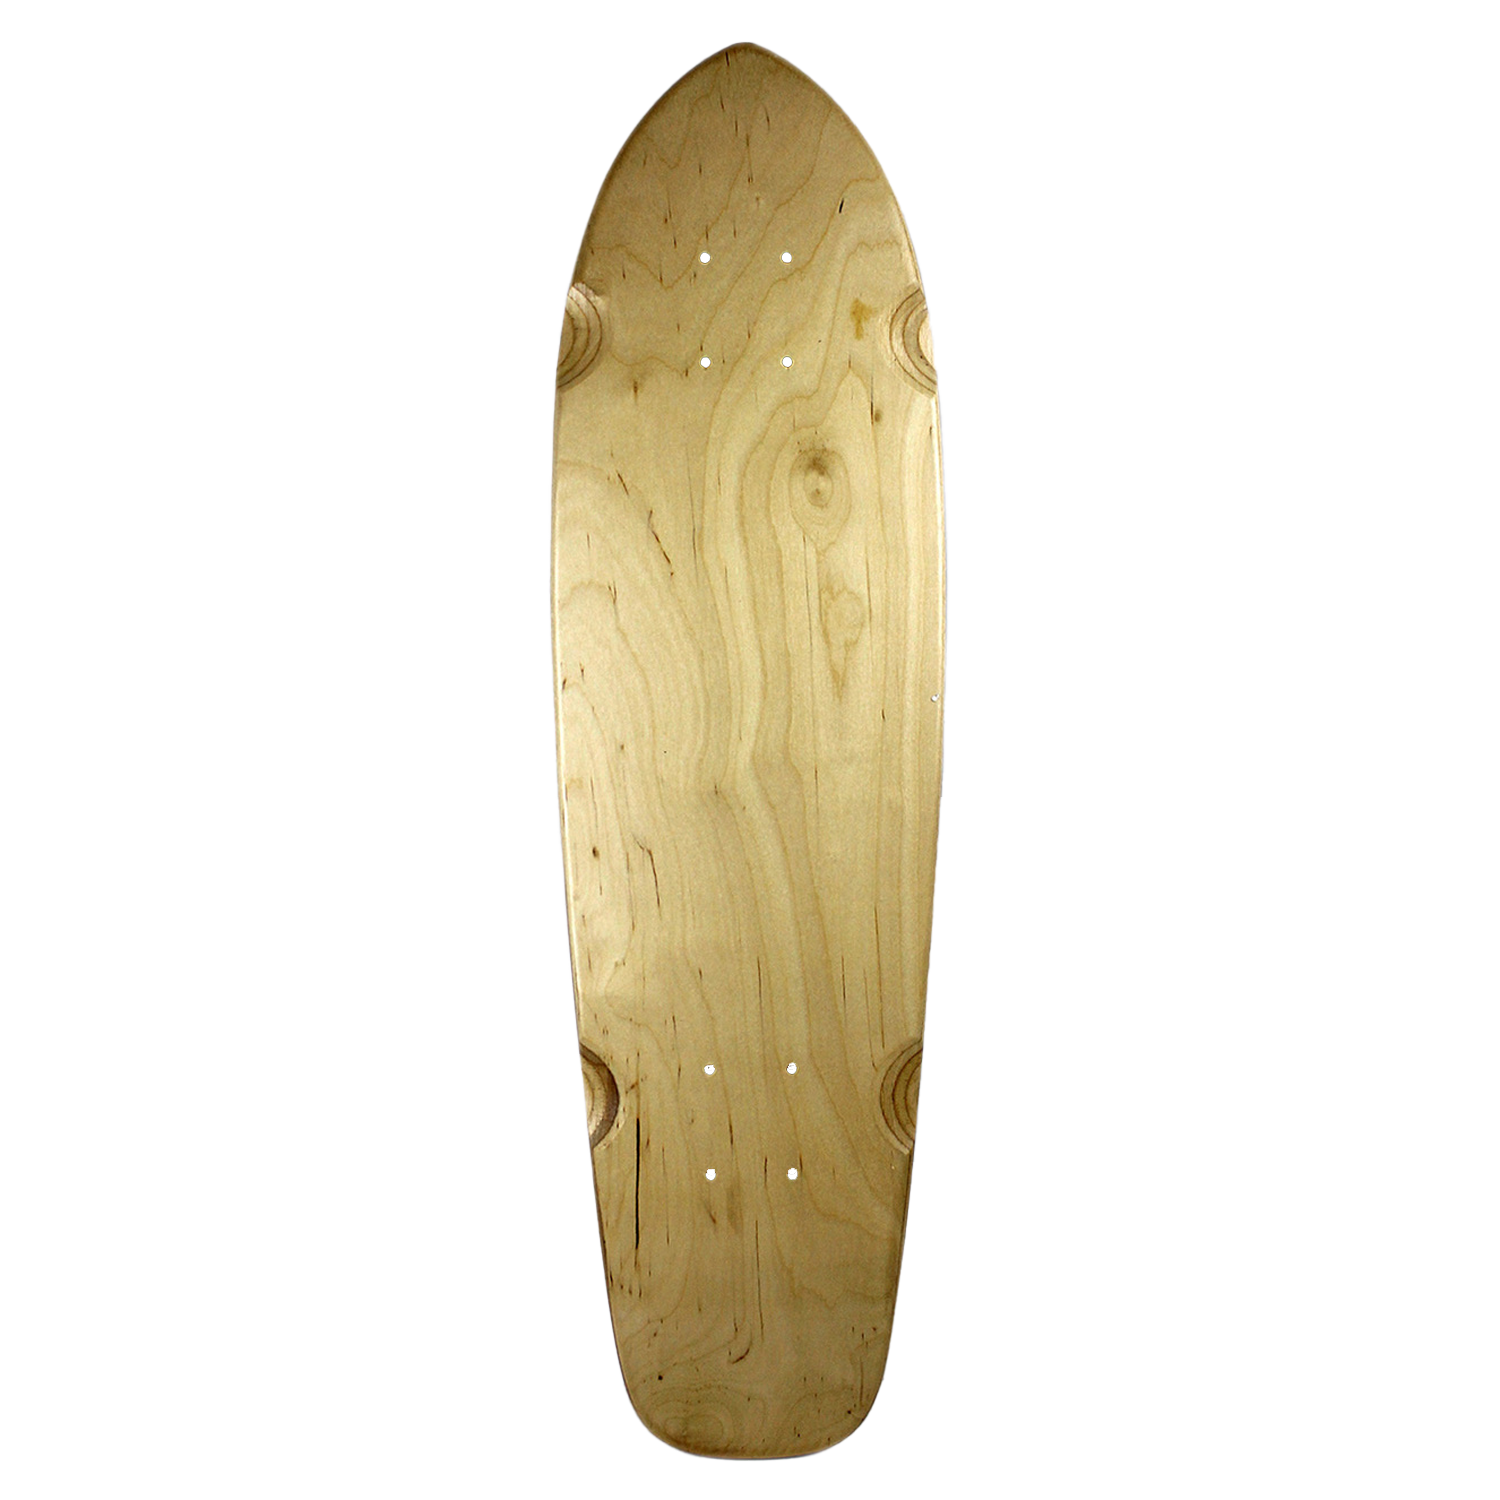 Moose Skateboard Cruiser Deck 7 Ply North American Maple Natural 7in x 28.71in